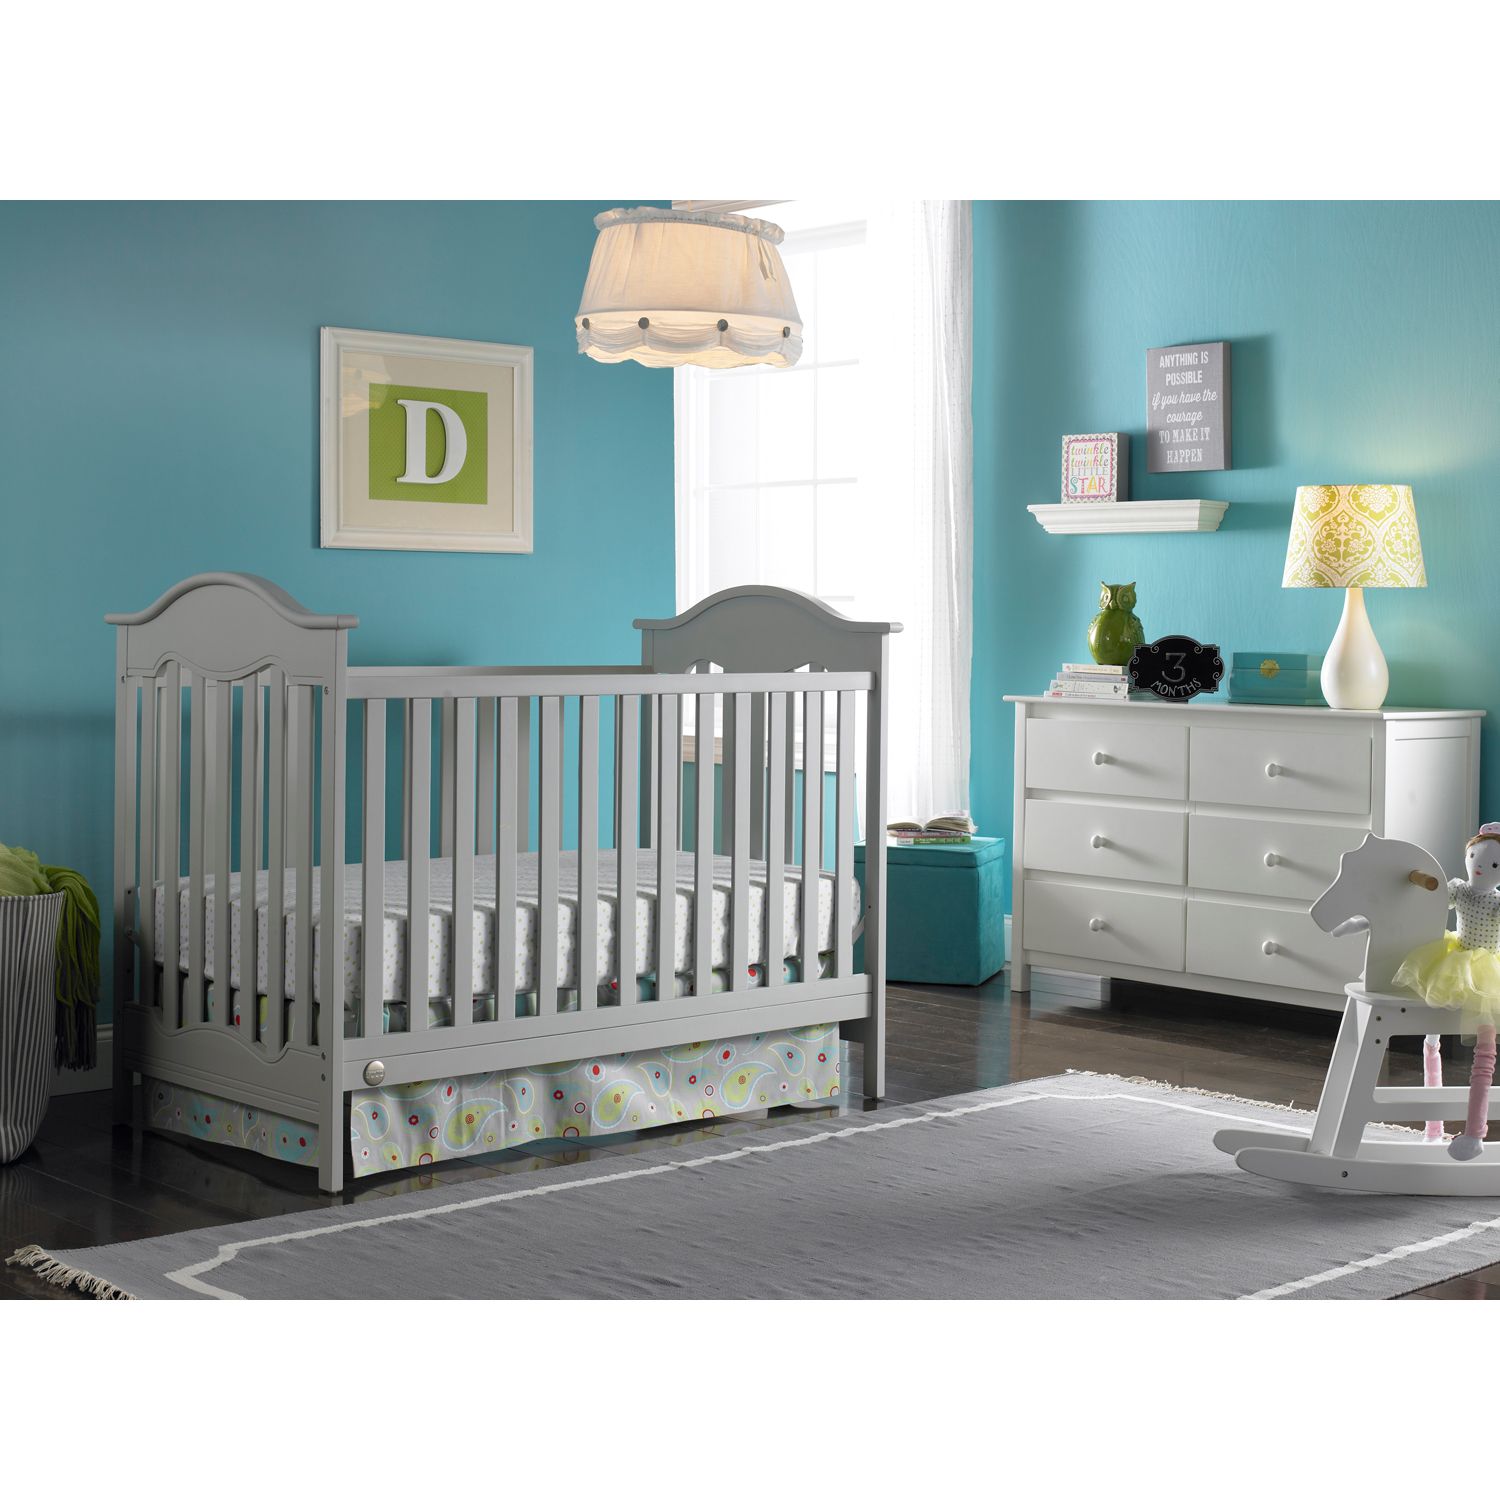 fisher price cribs reviews